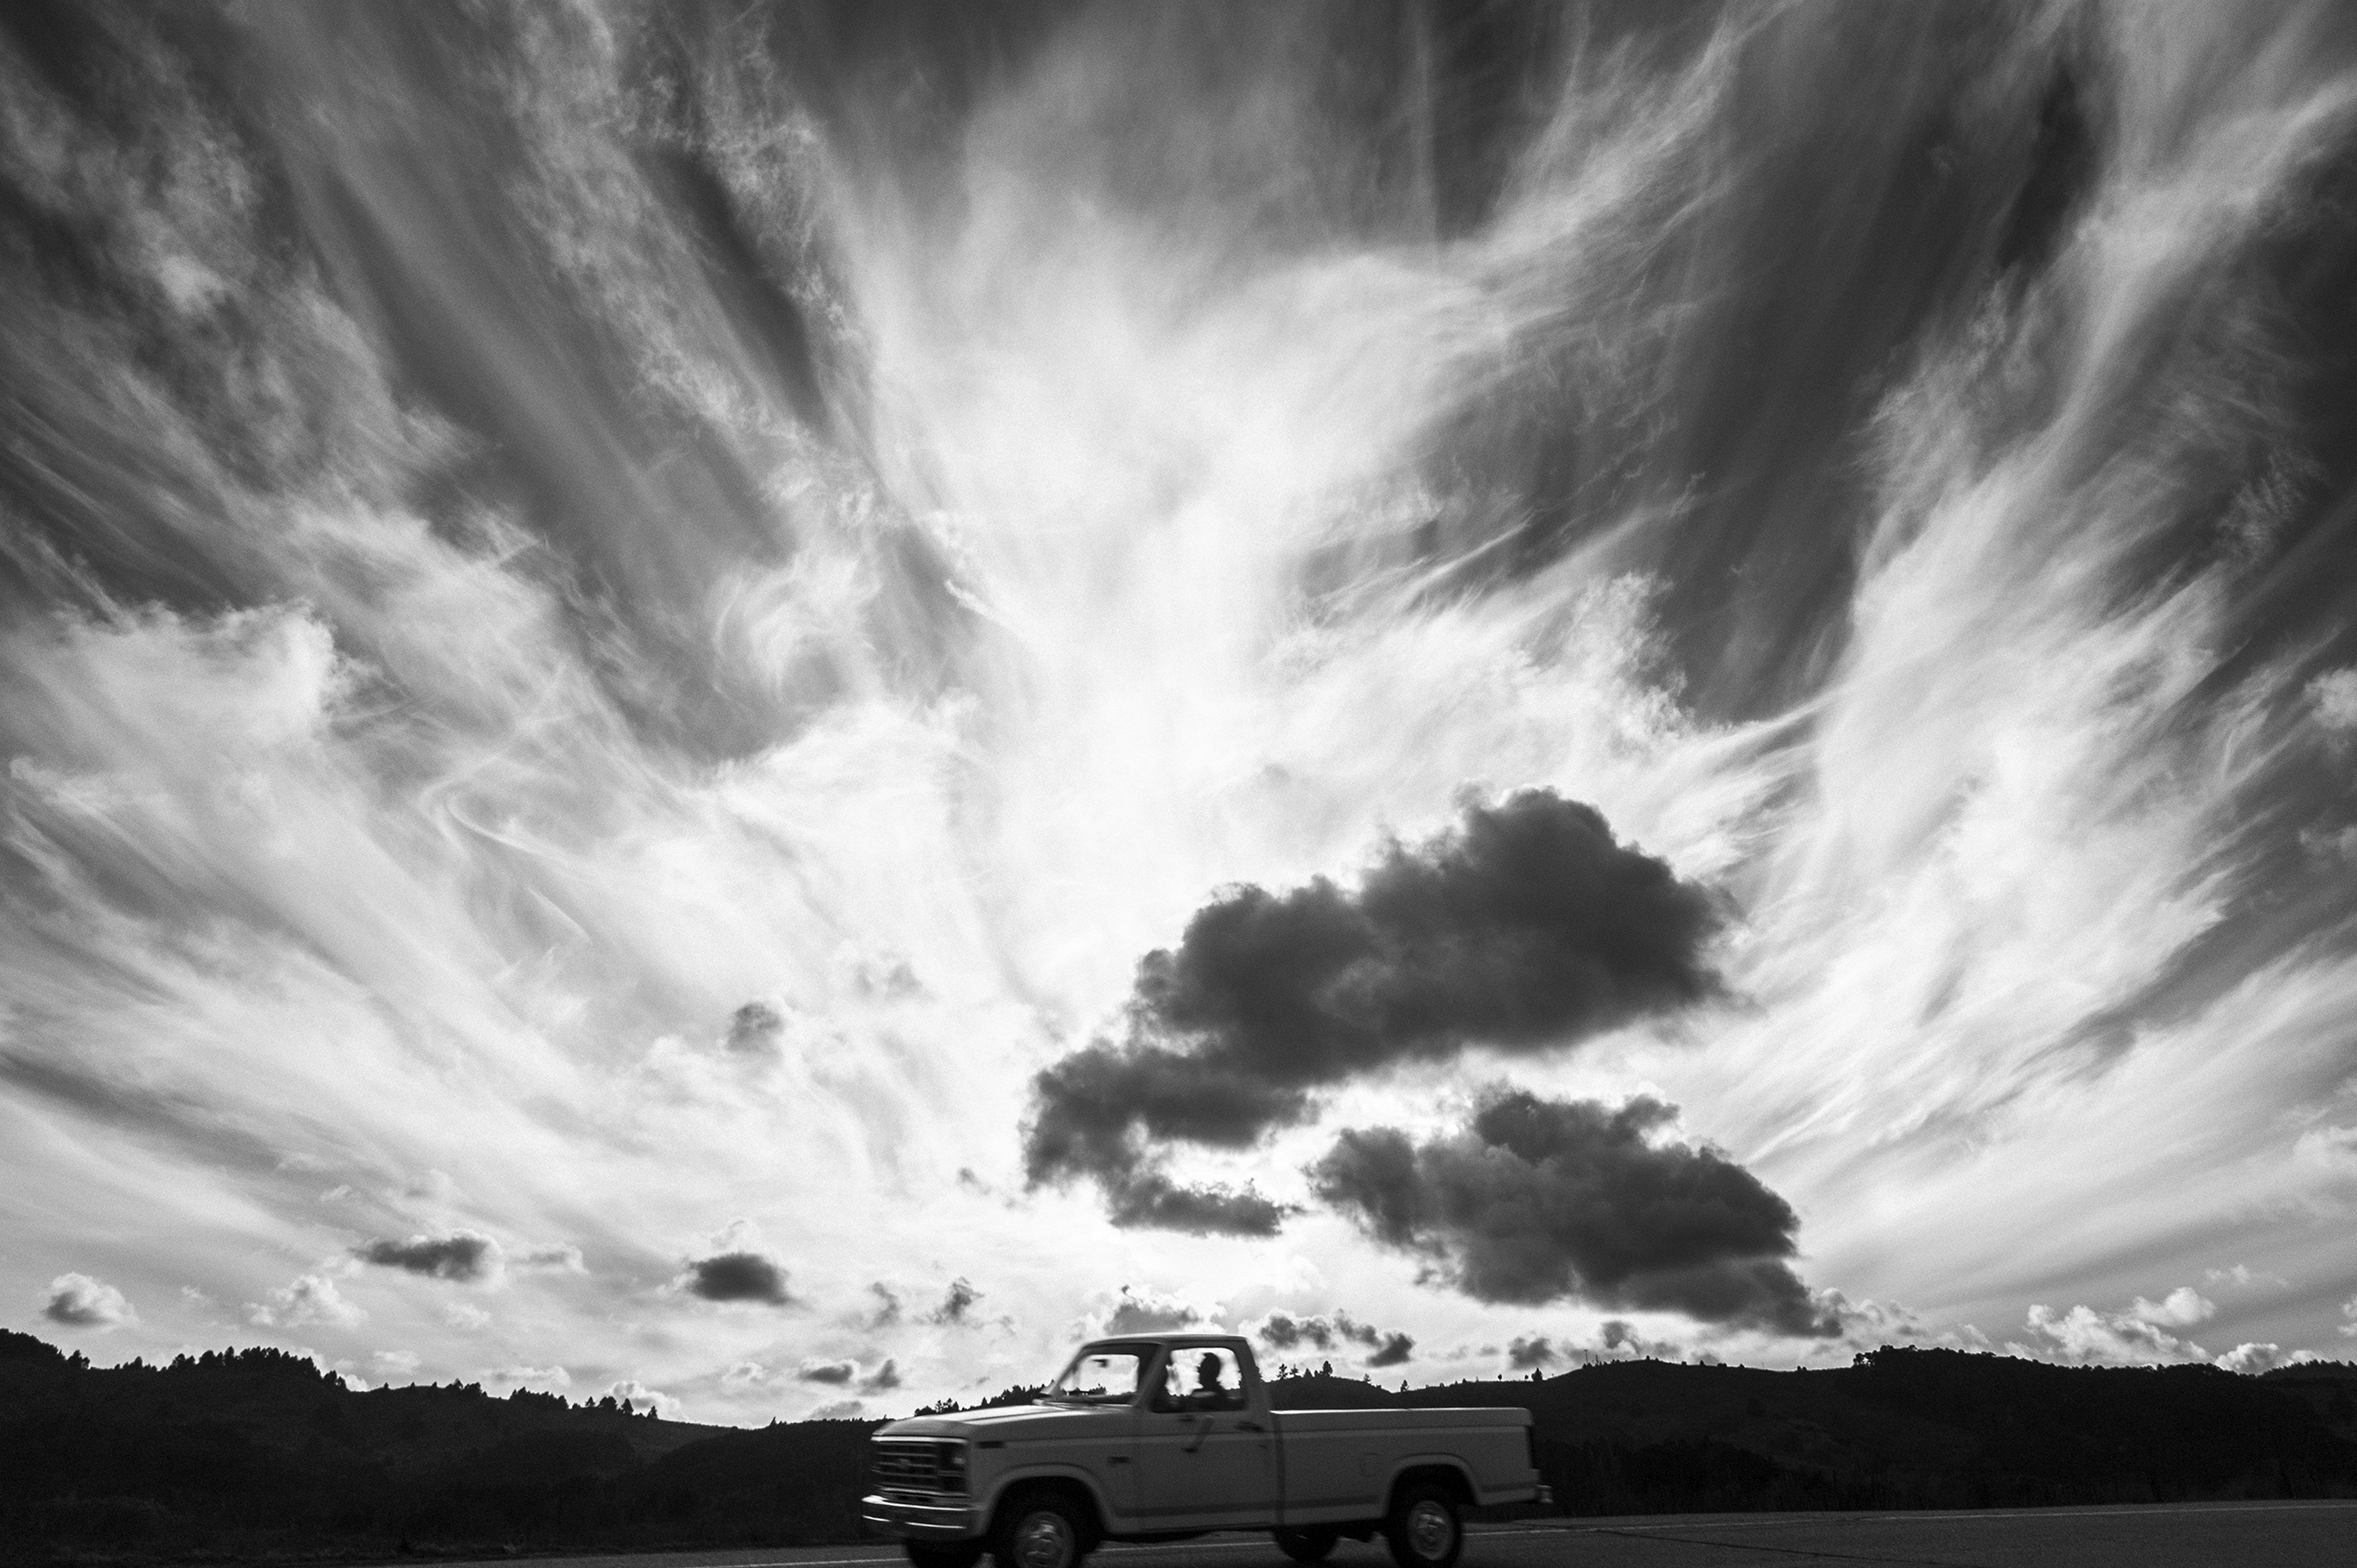 A wide shot of a man driving a pickup truck with low hills in the background. The largest and most striking part of the image is the sky. The clouds look flamelike.